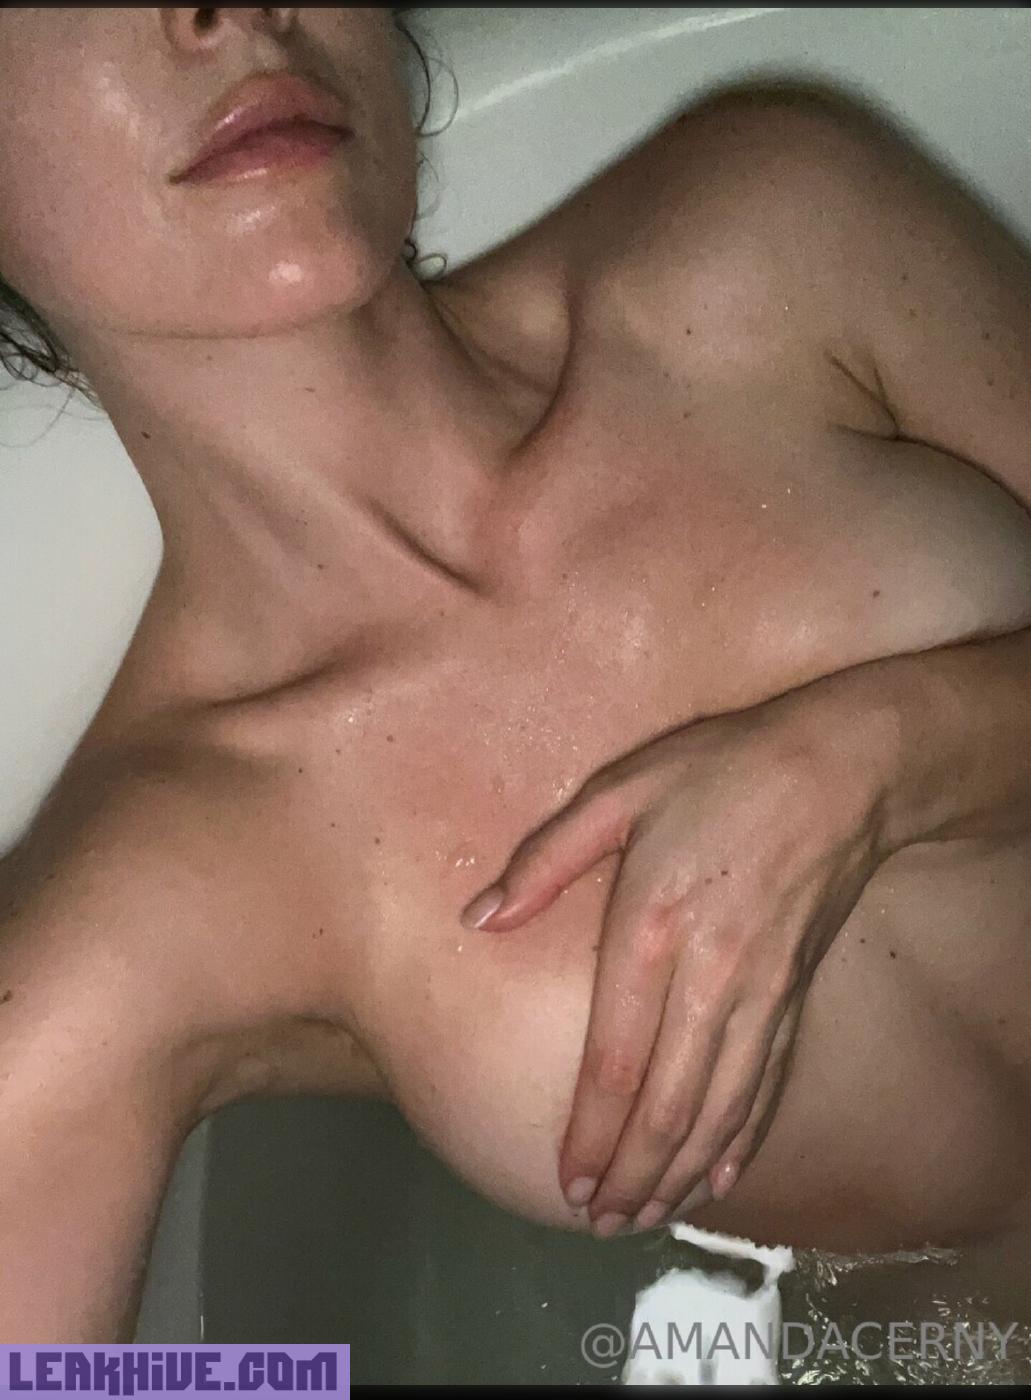 Amanda cerny nude boobs flash onlyfans video leaked